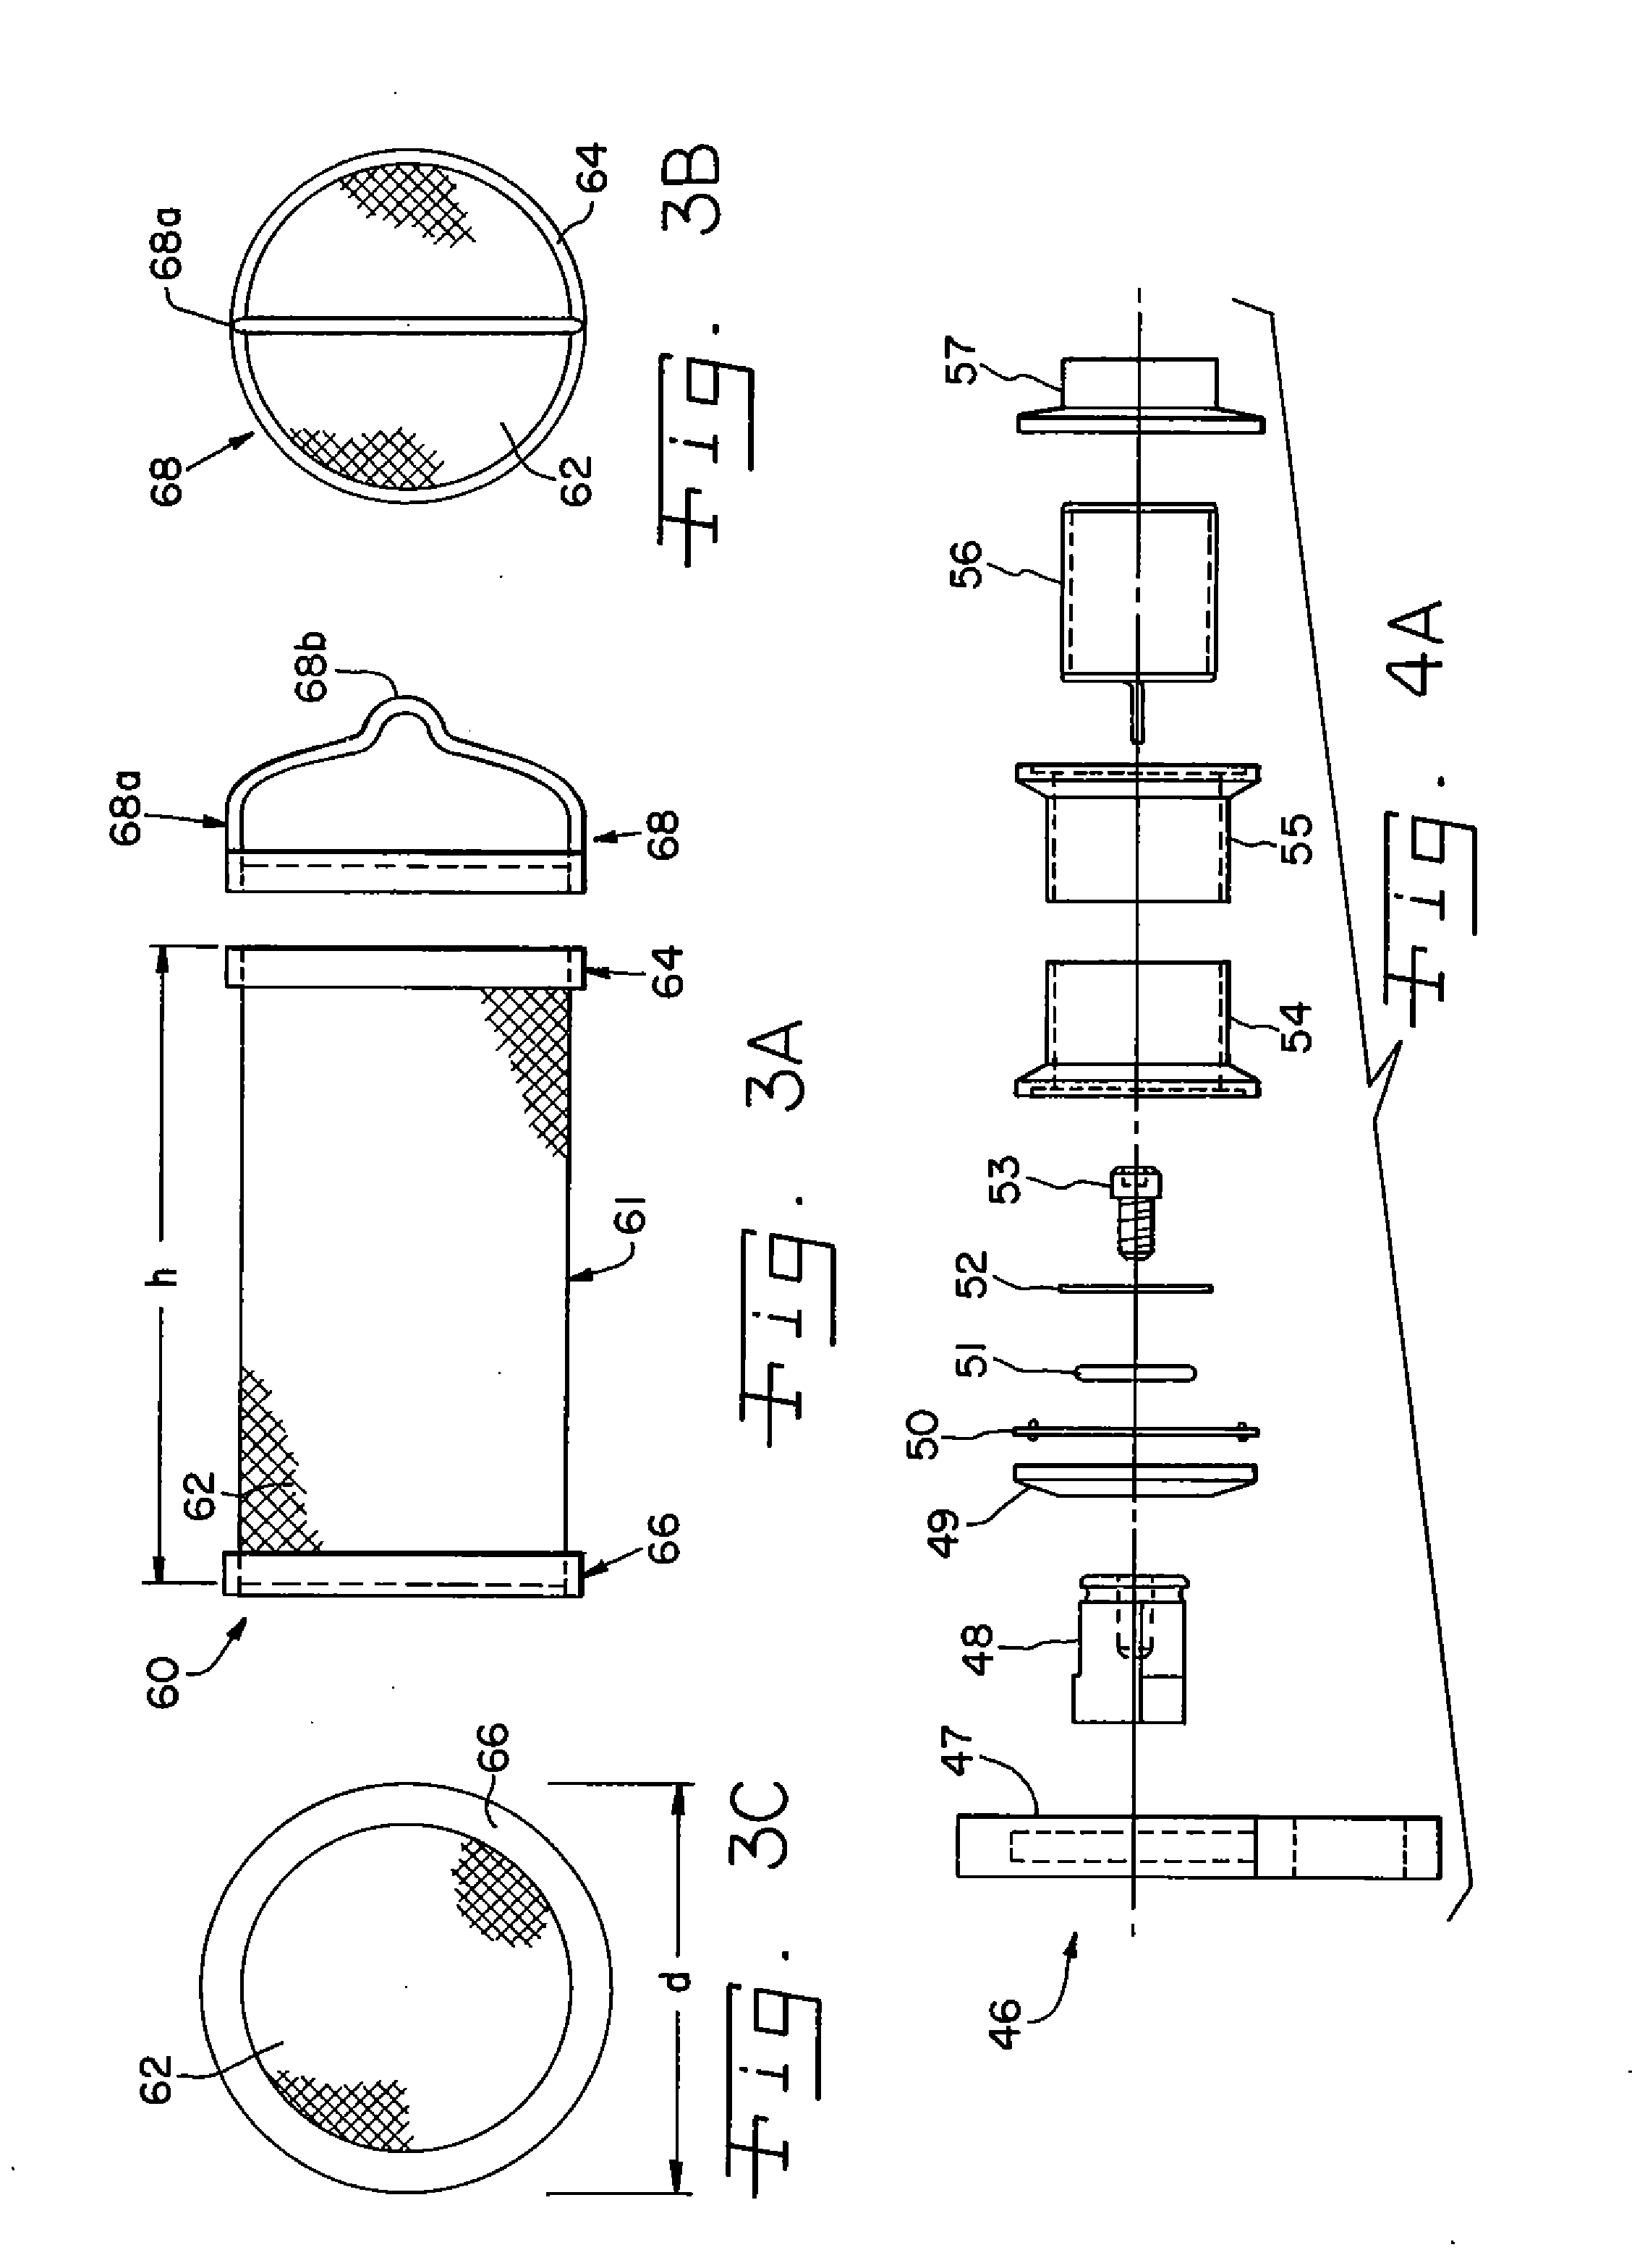 System and method for treating infectious waste matter